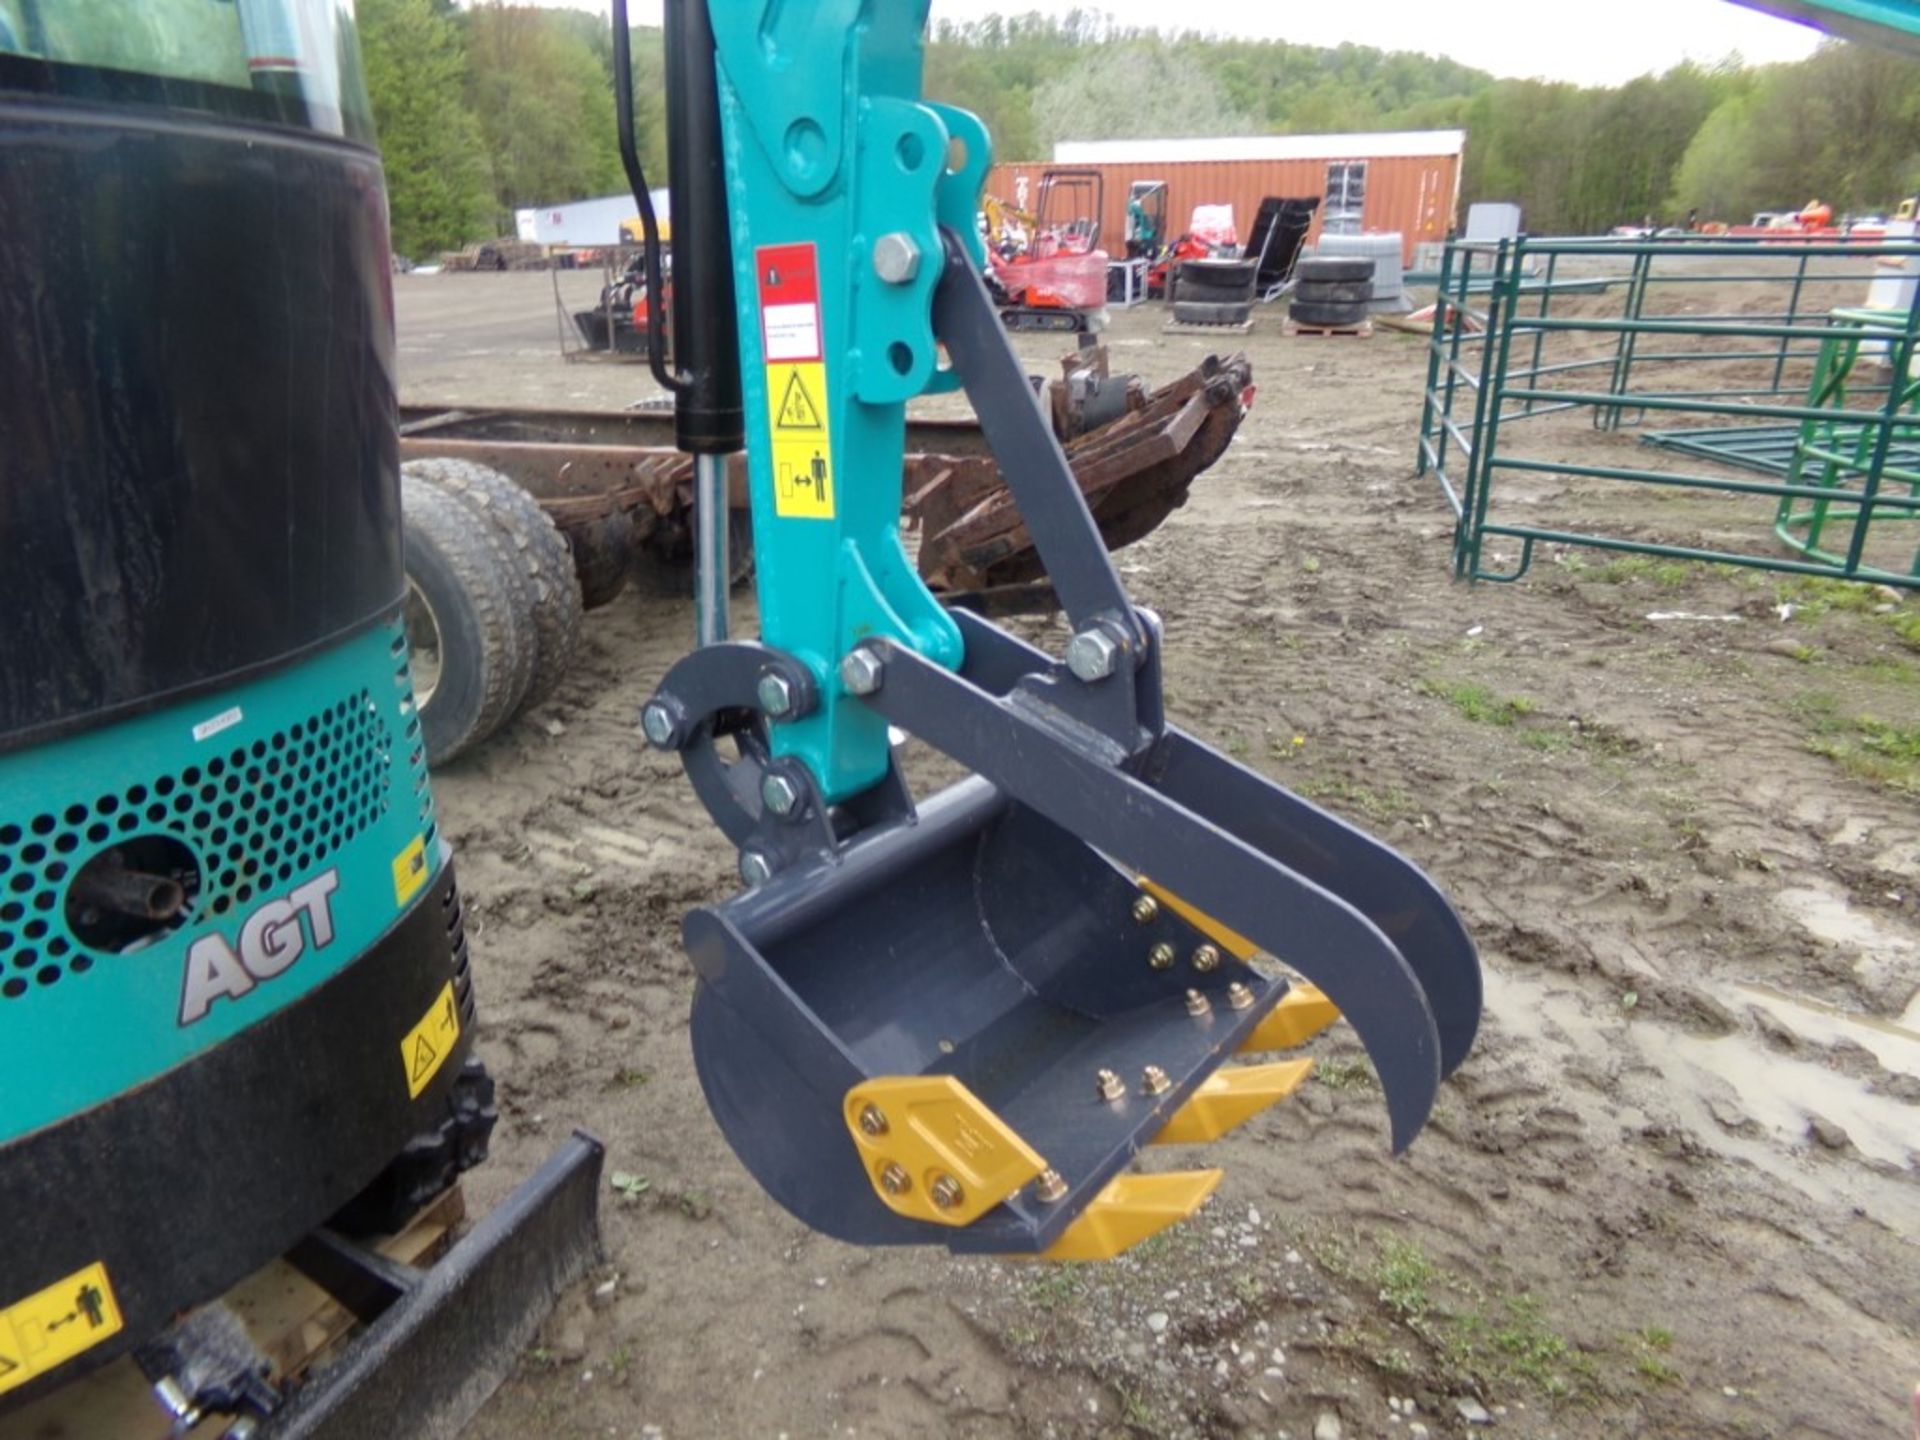 New AGT Industrial H15 Mini Excavator with Open Cab, Canopy,Green/Blue Grader Blade, Stationary - Image 4 of 6